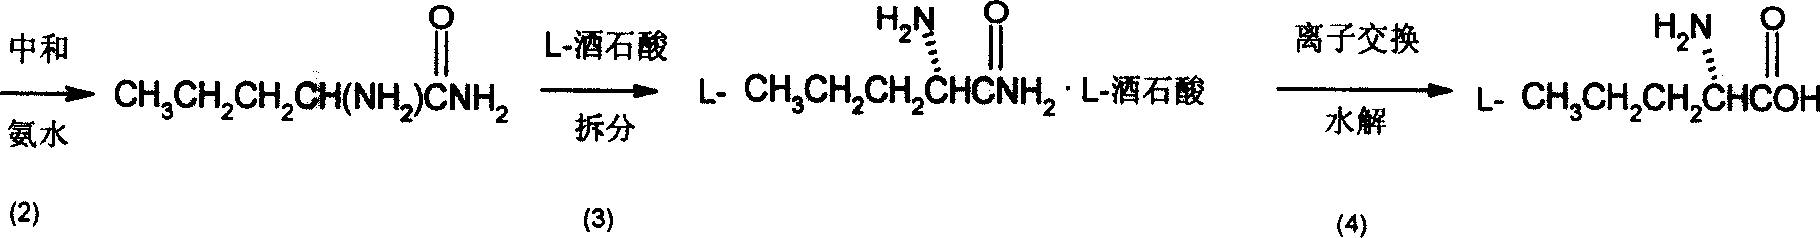 Synthesis method of chiral norvaline